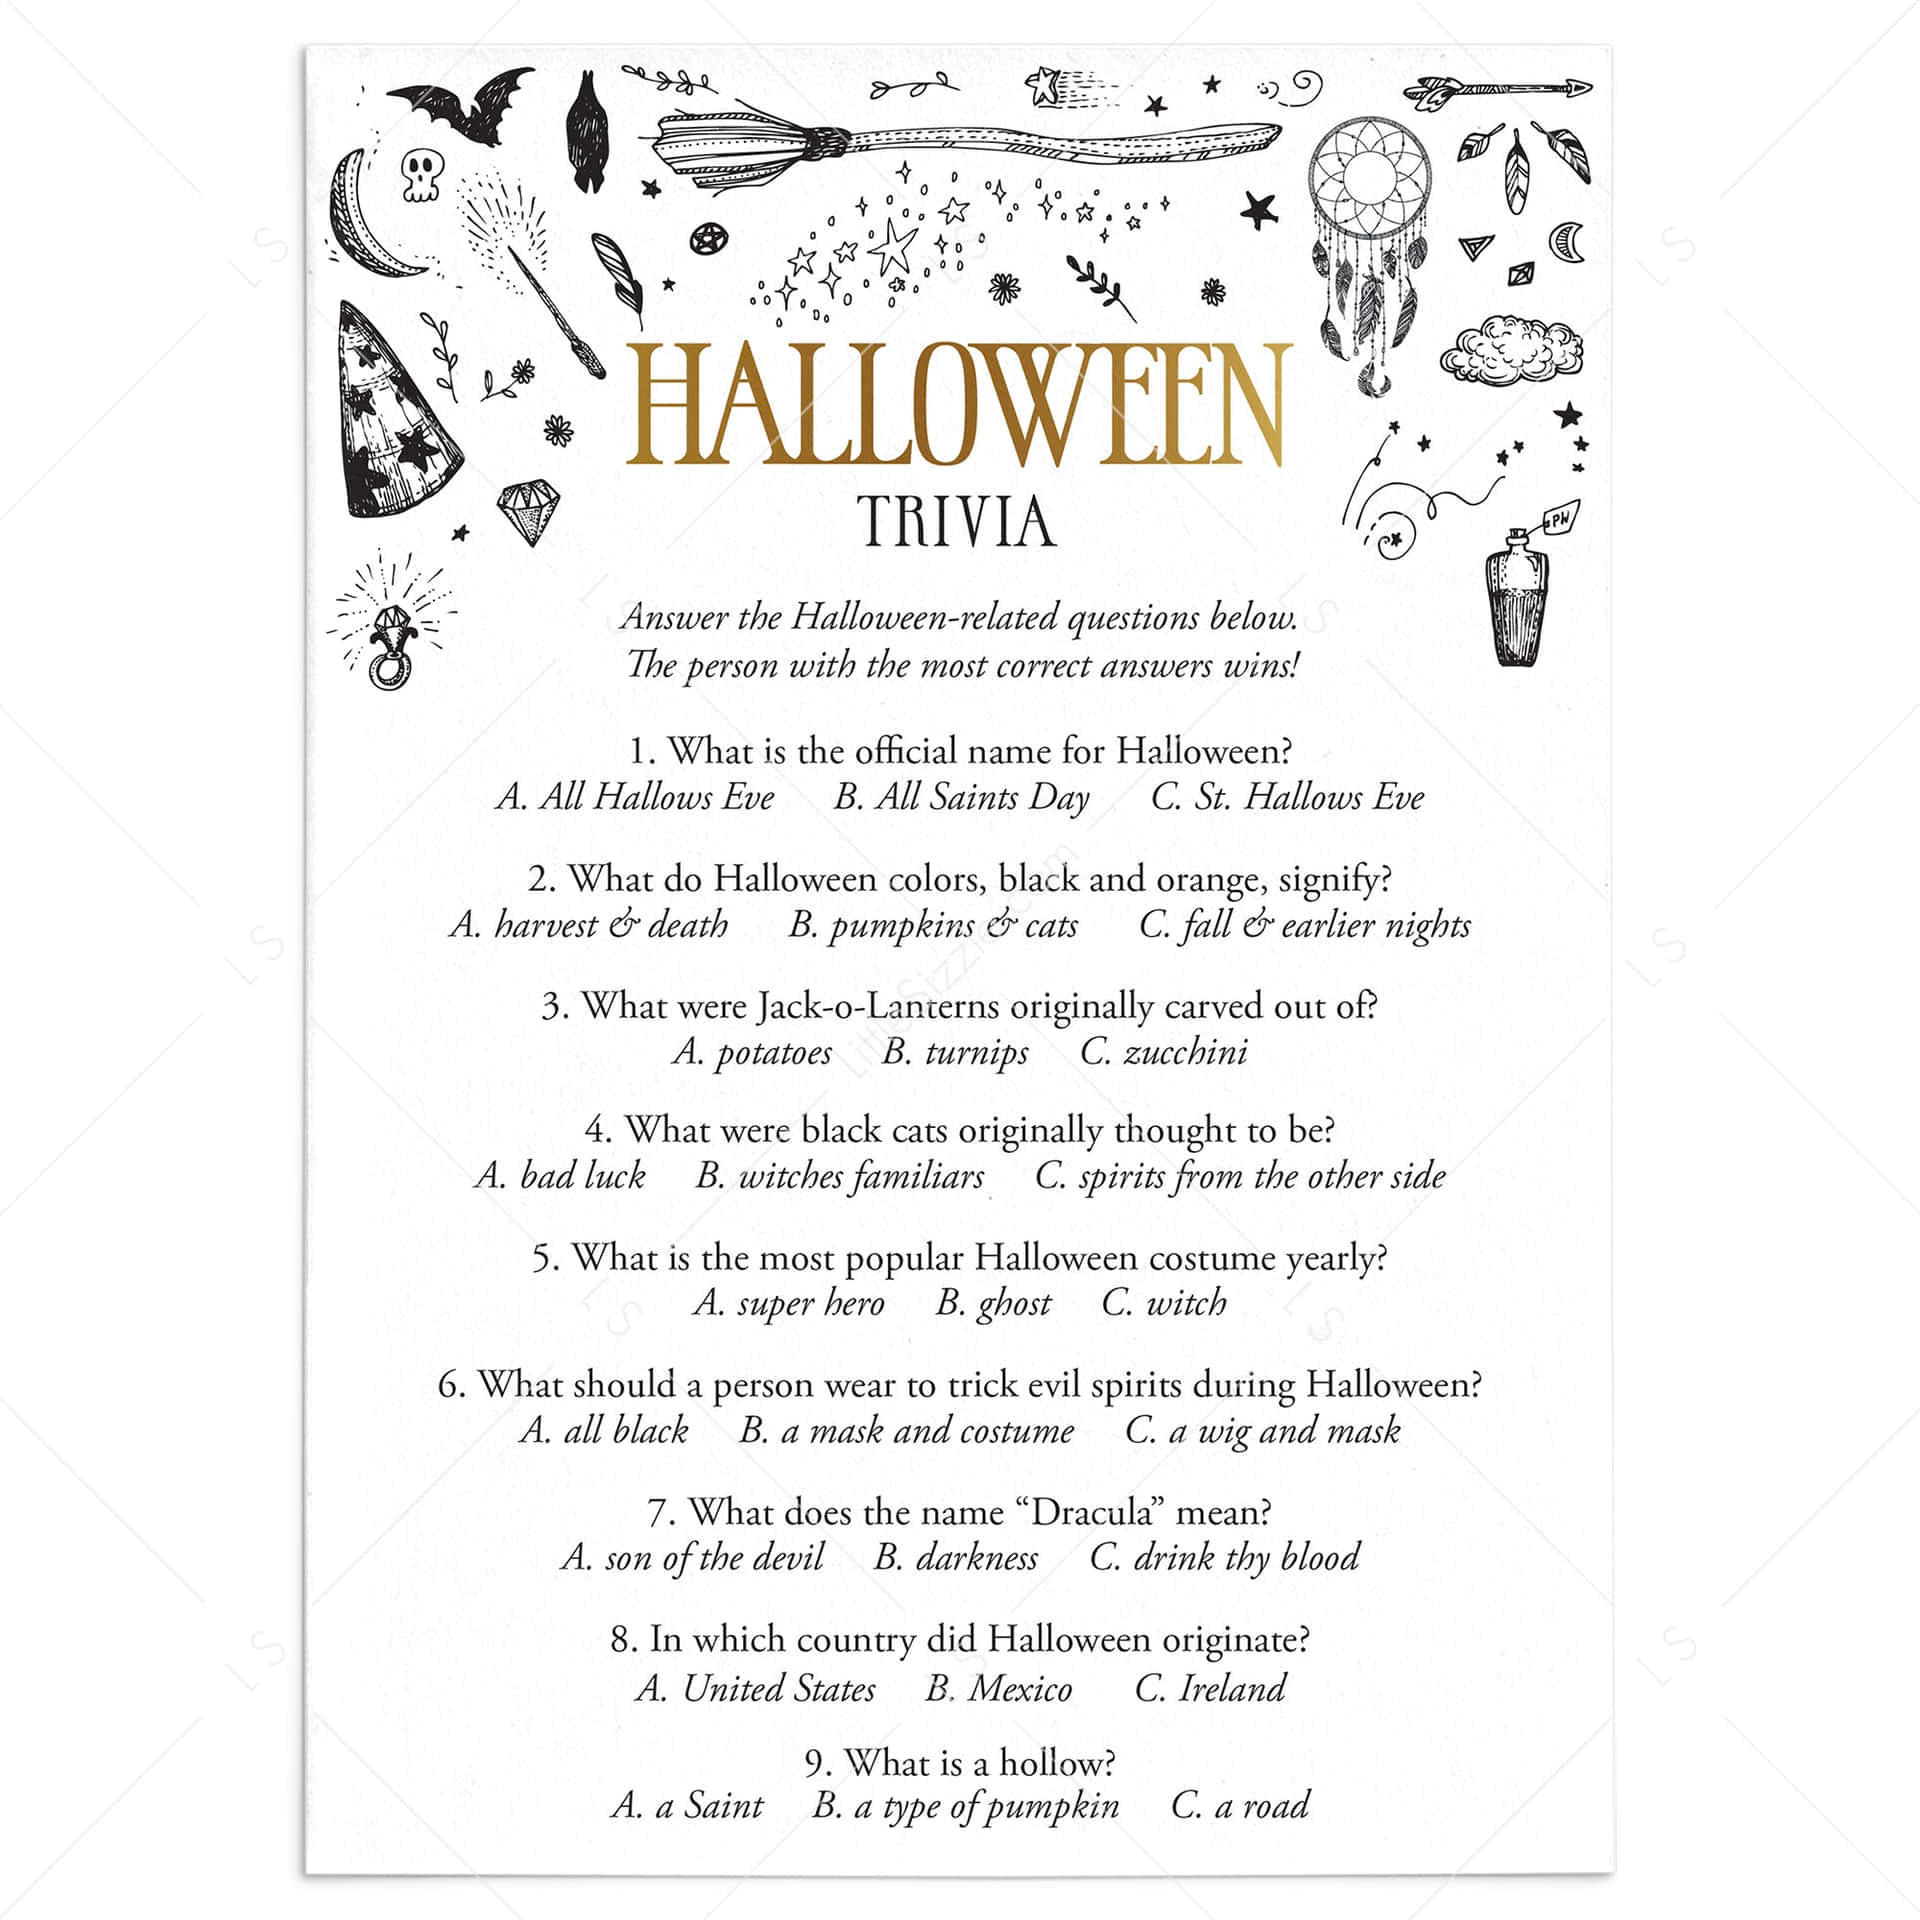 Celebrate Halloween with a Spooky Trivia Night Wallpaper